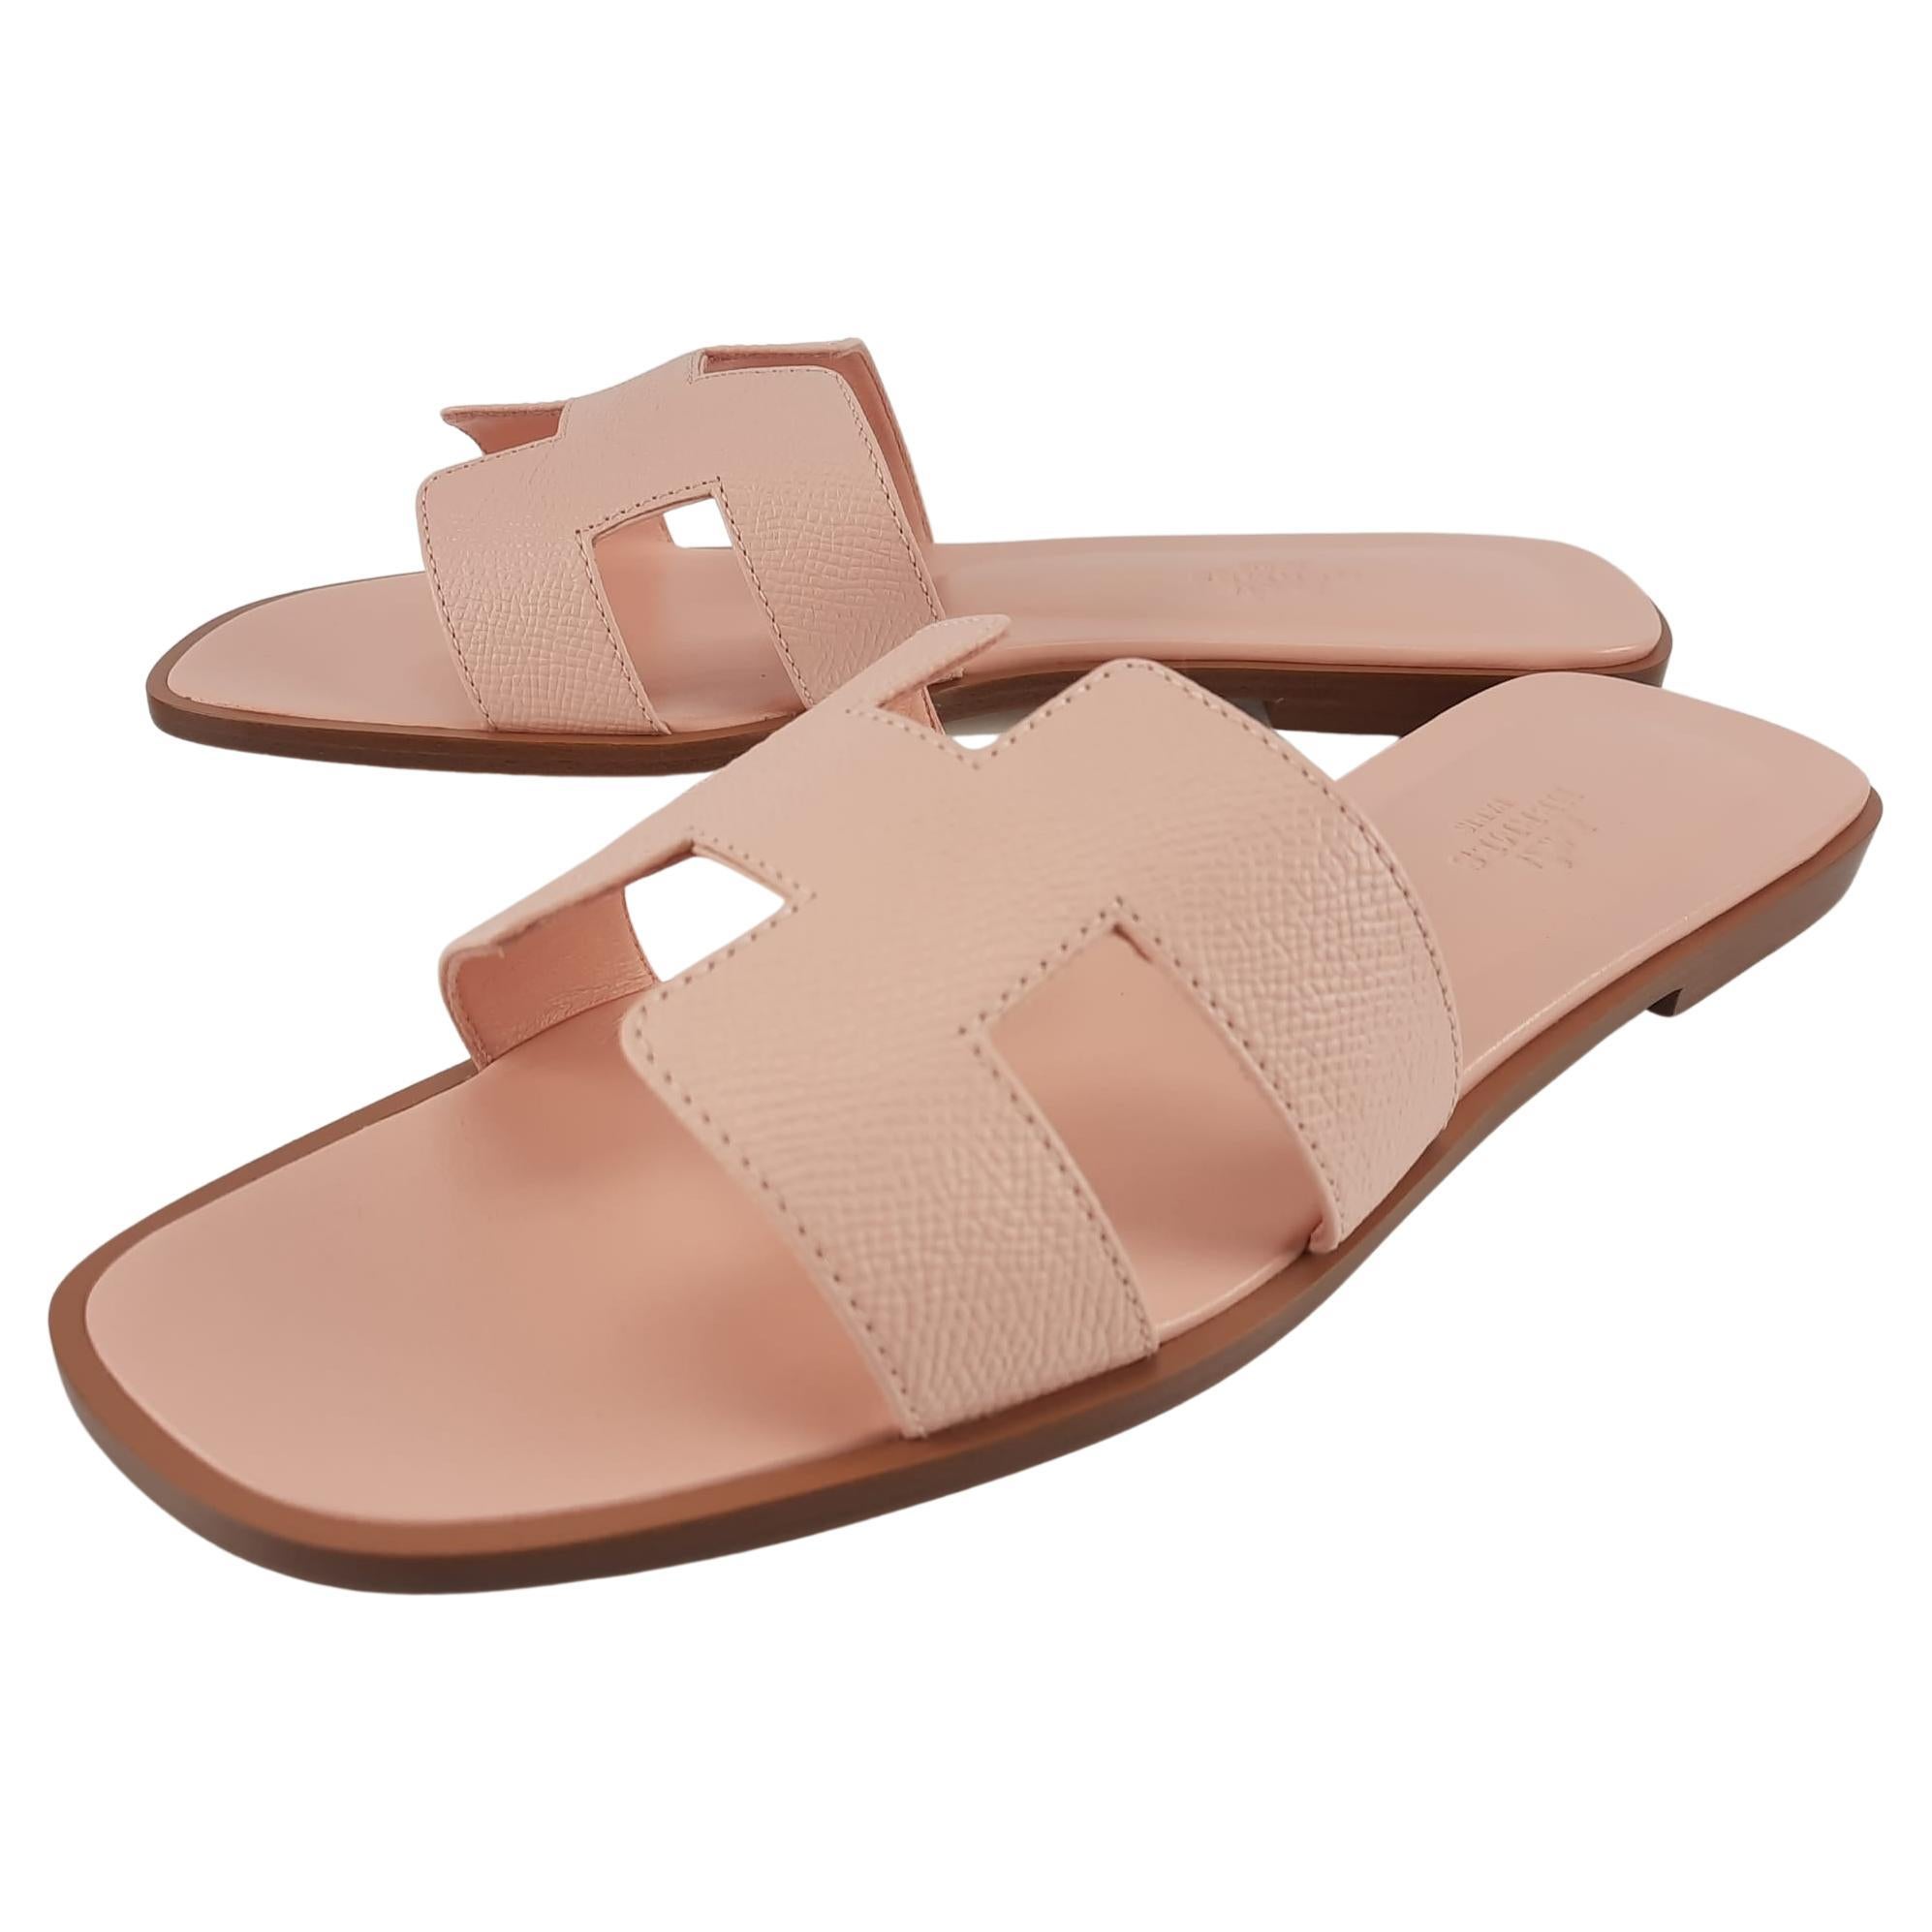 HERMES Oran Sandals in Etoupe Leather Size 35.5